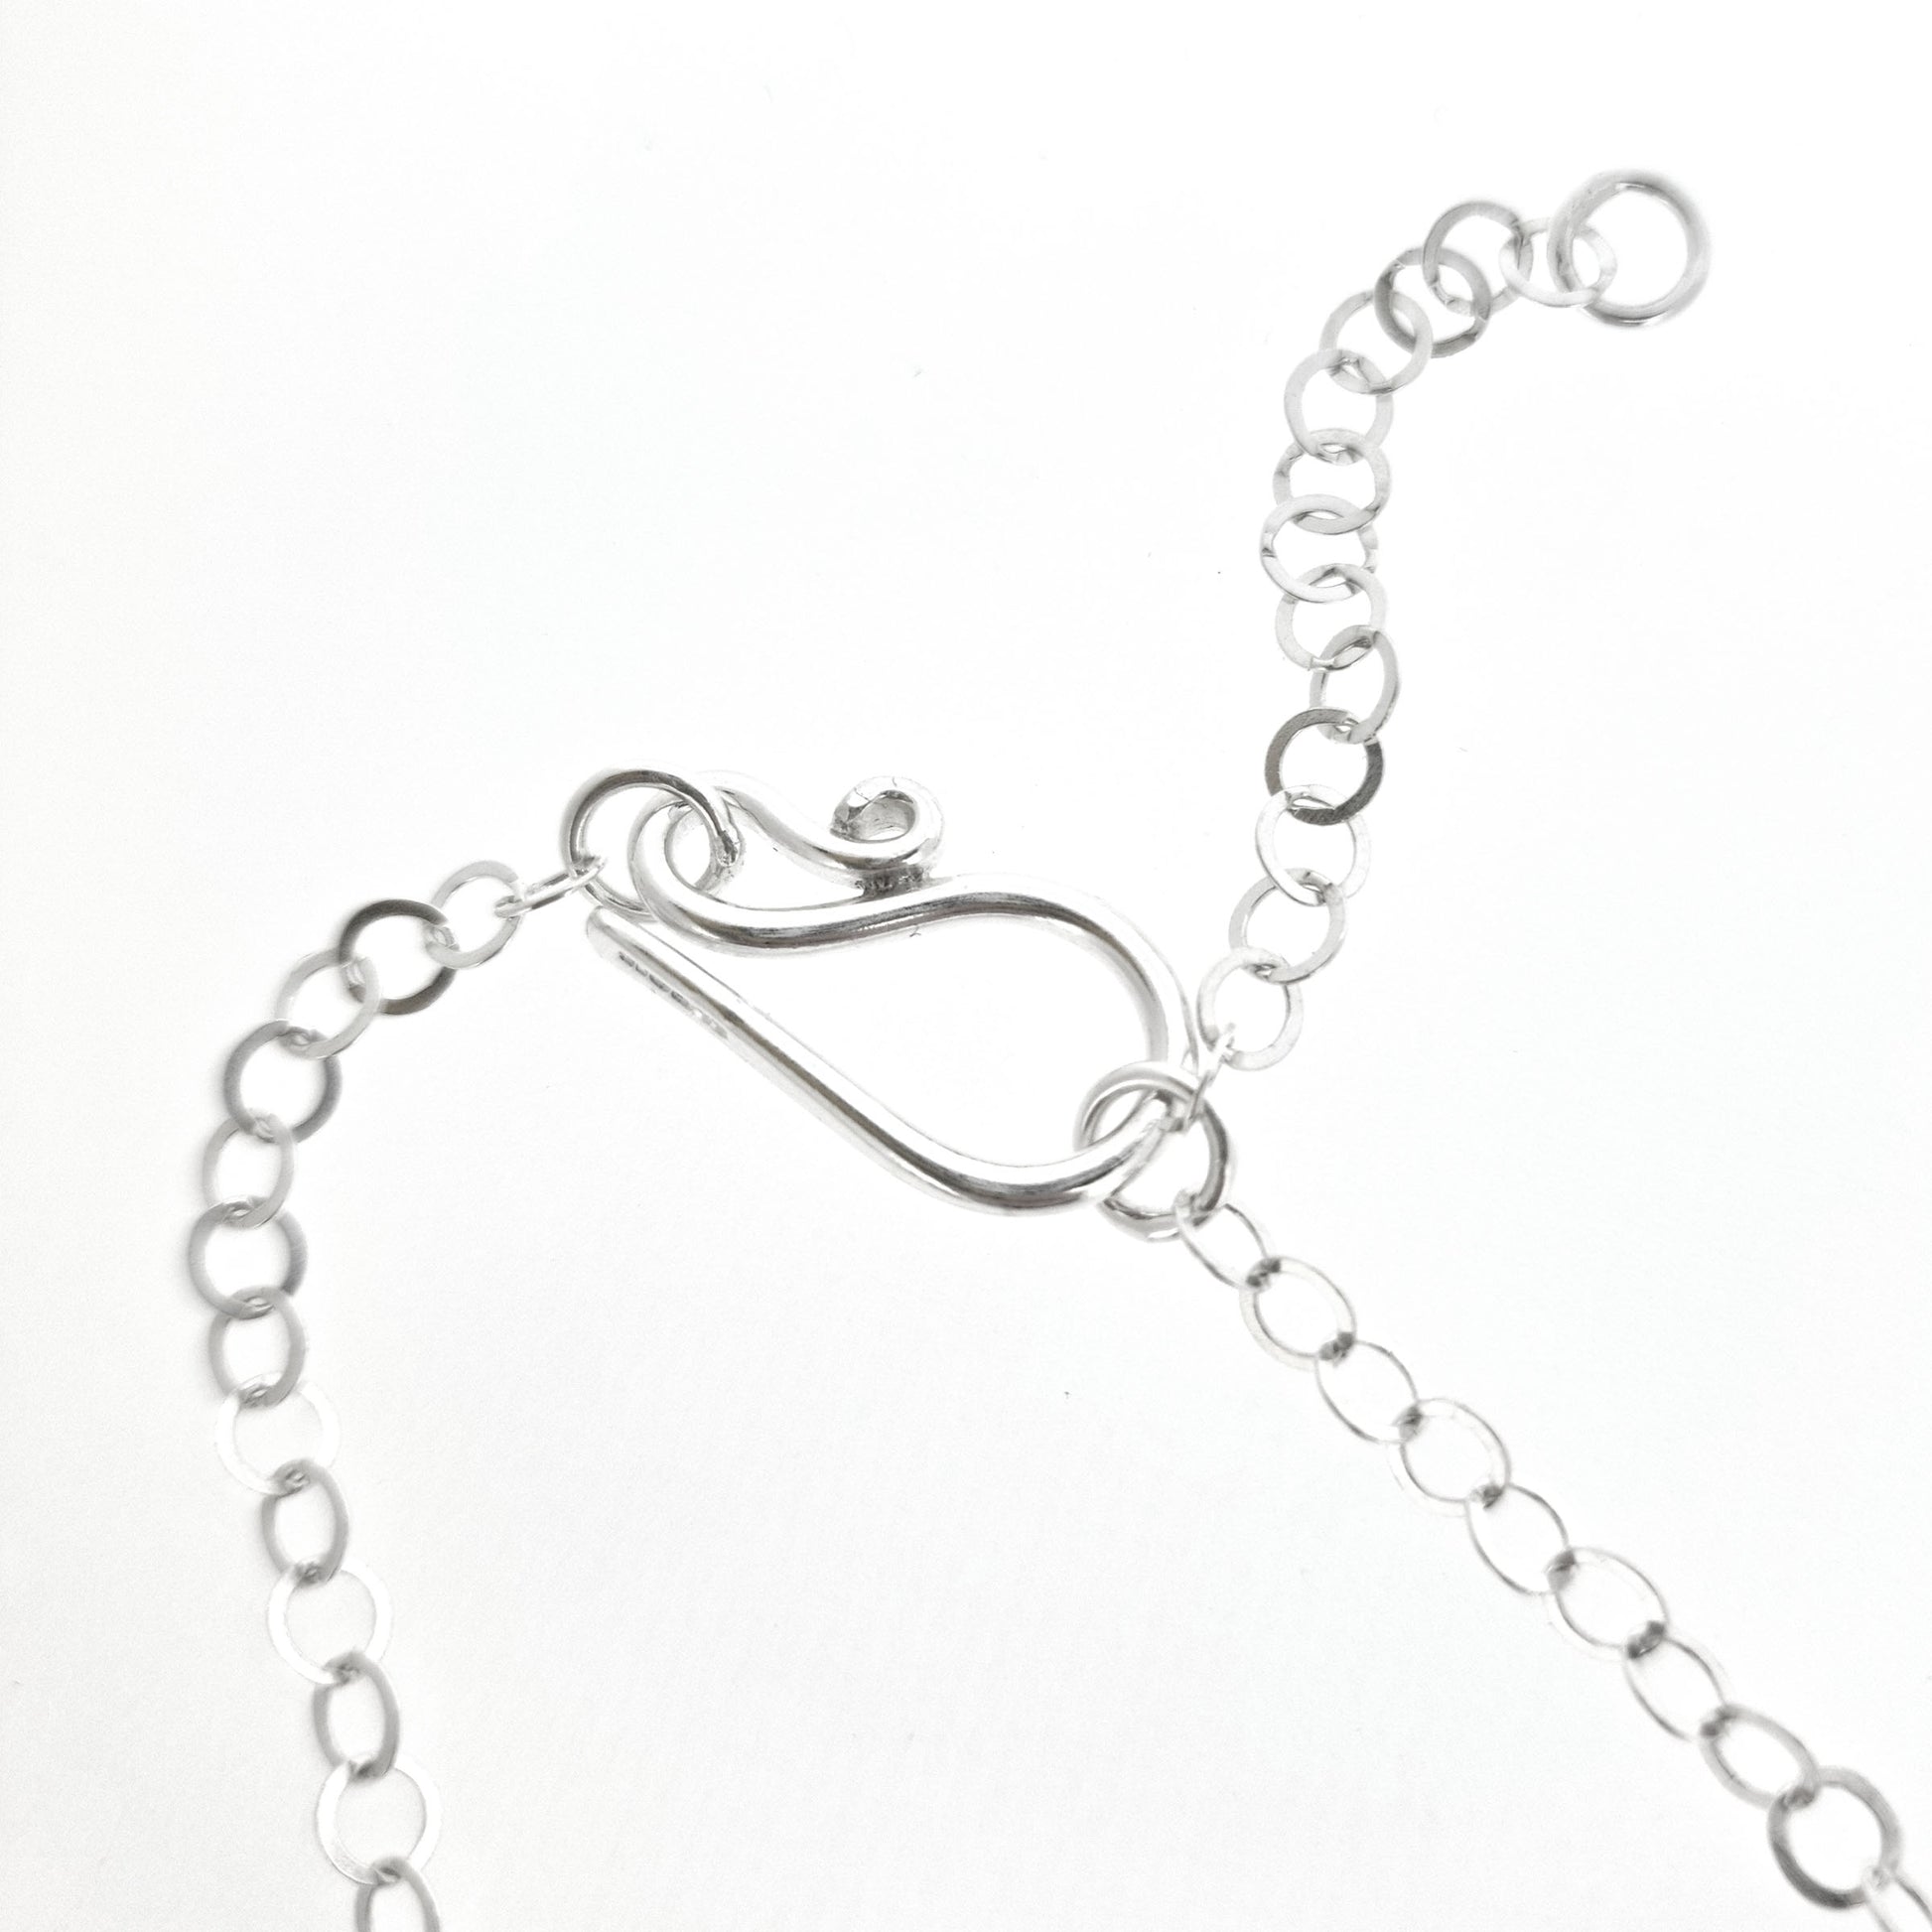 Handmade silver s clasp and chain.